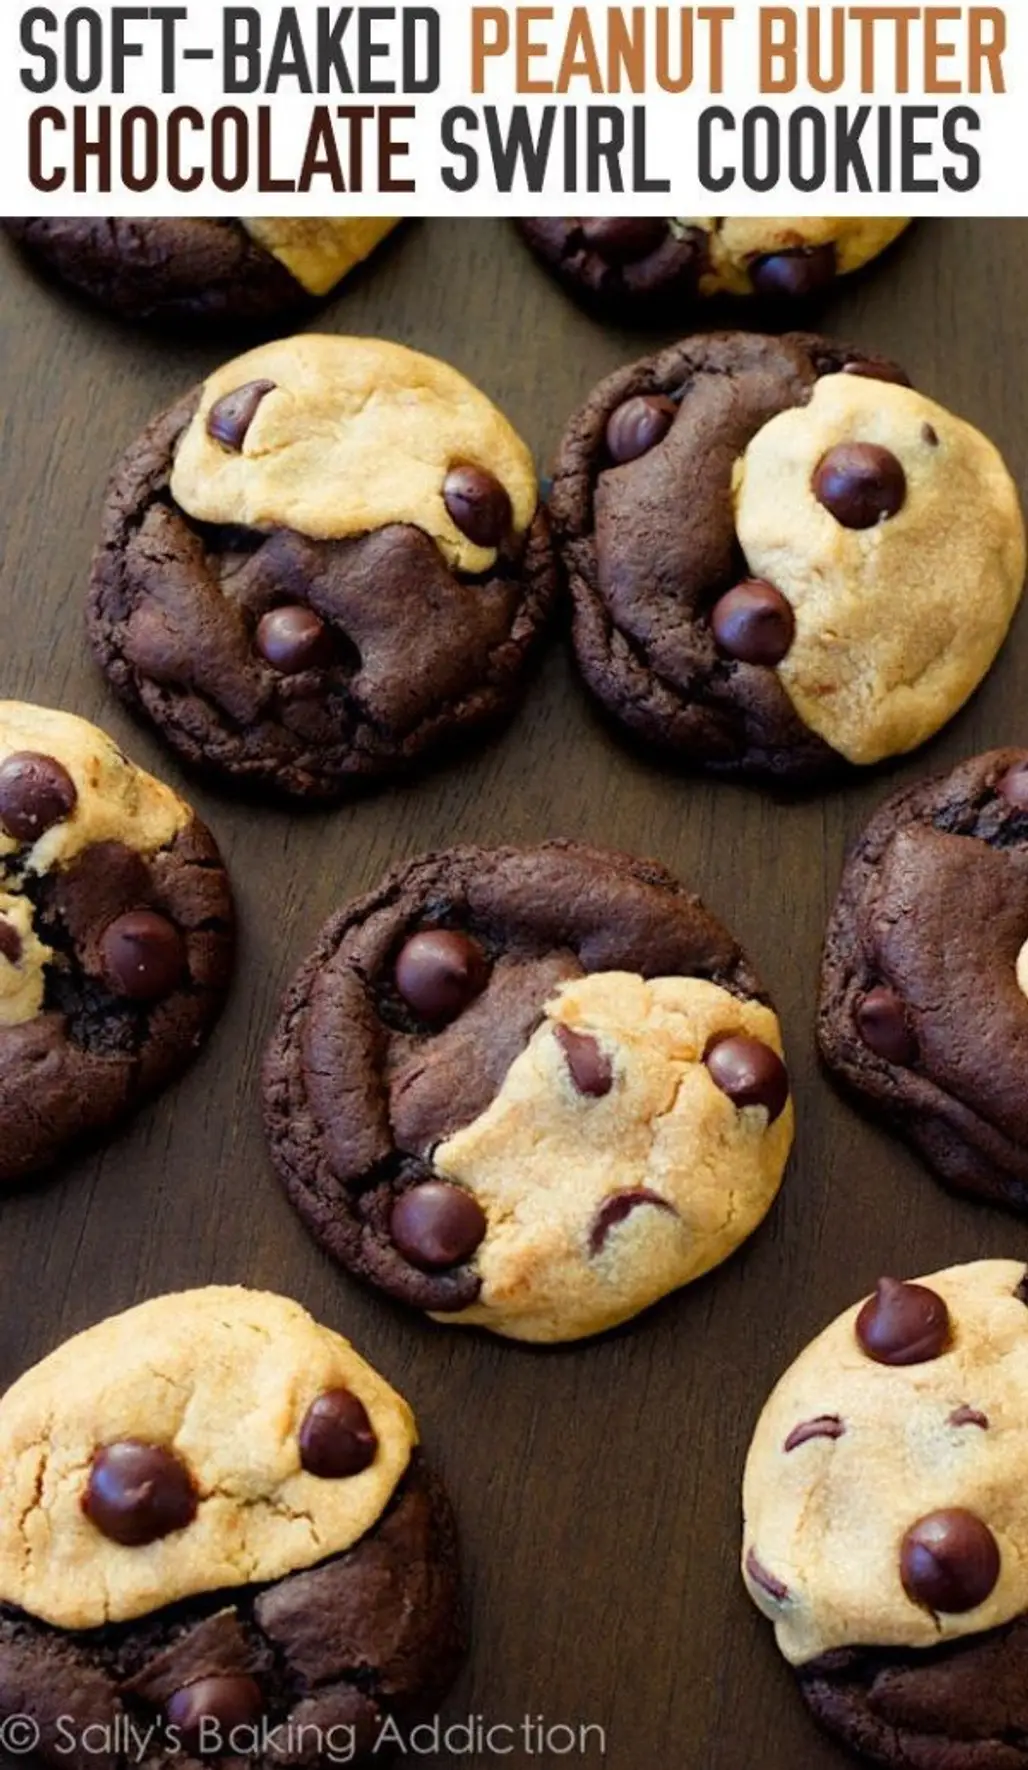 Peanut Butter and Chocolate Swirl Cookies